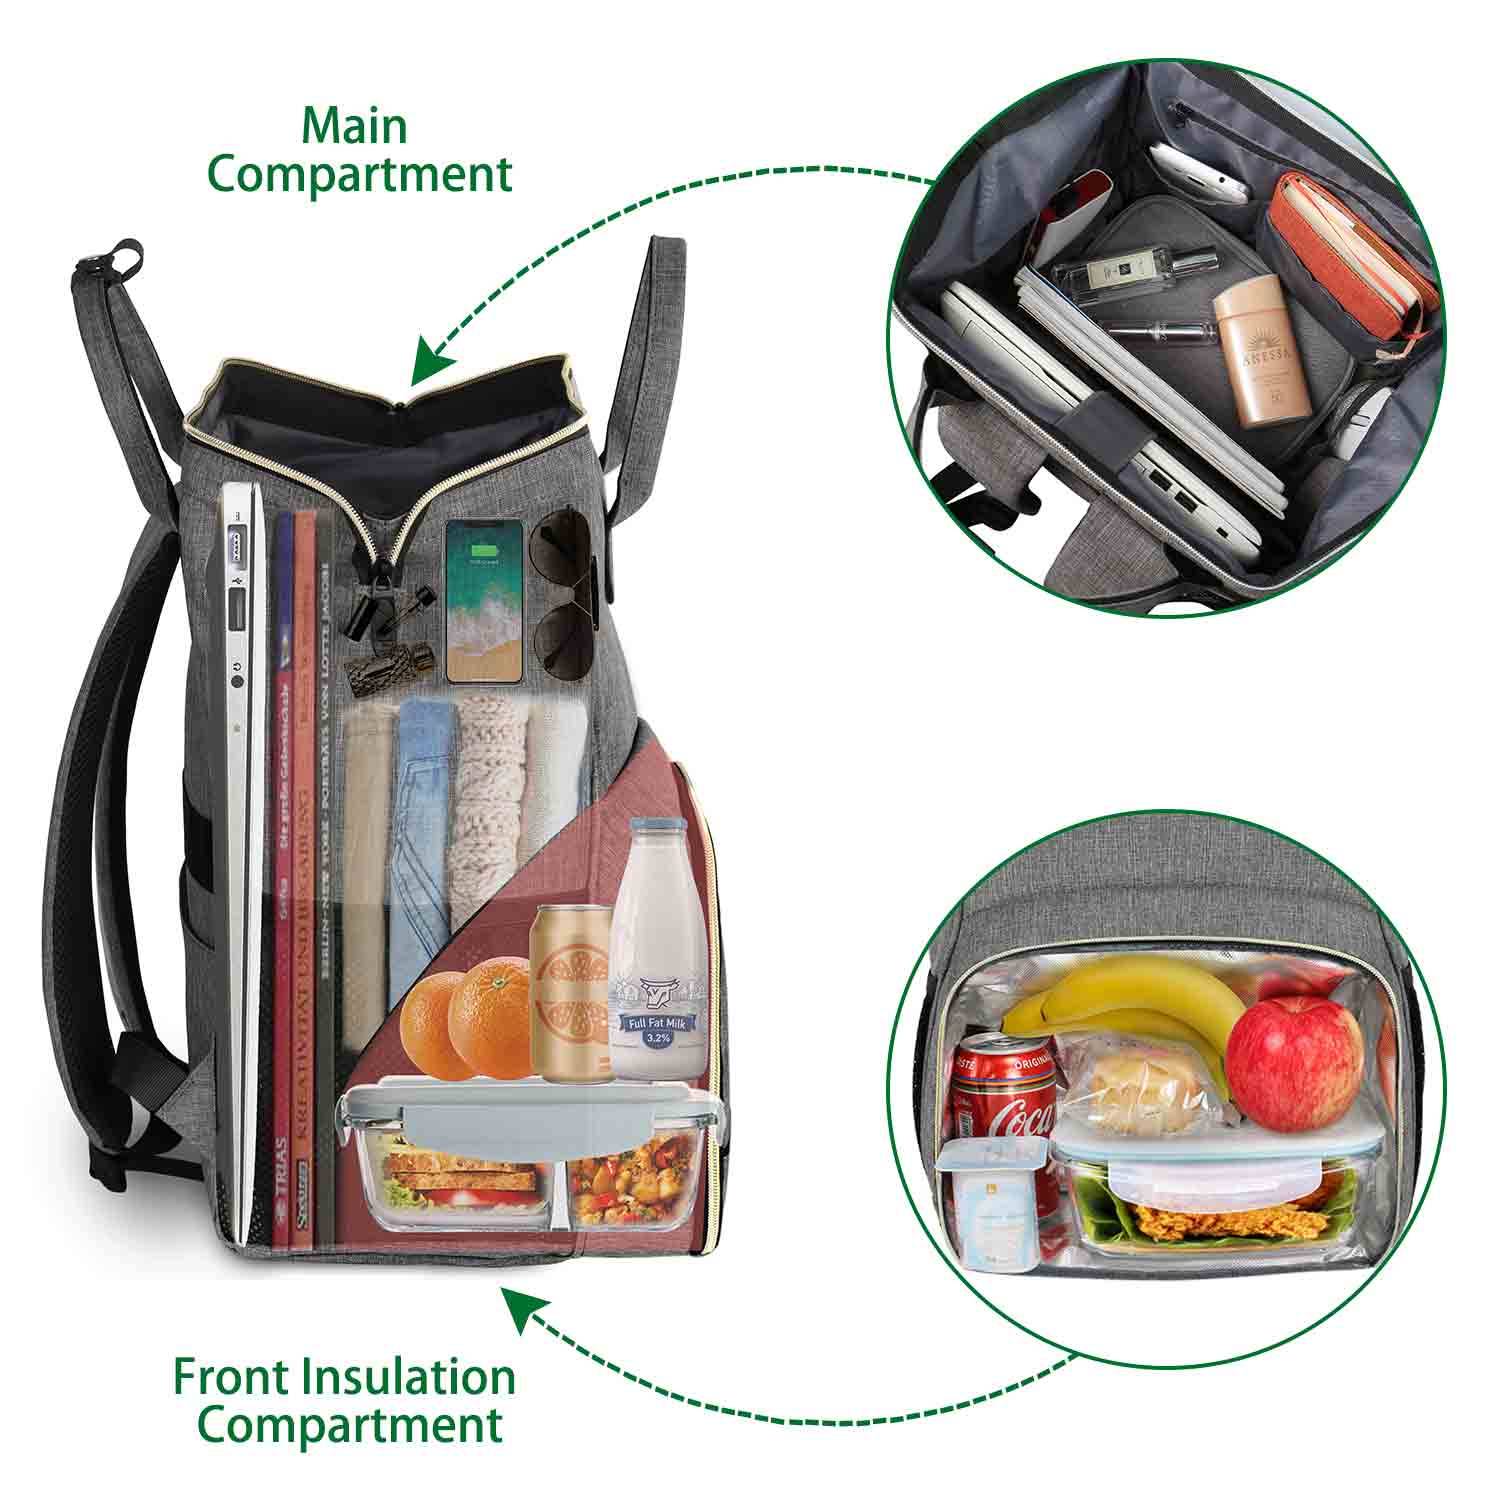 Matein Lunch Box Backpack Lunch Bag